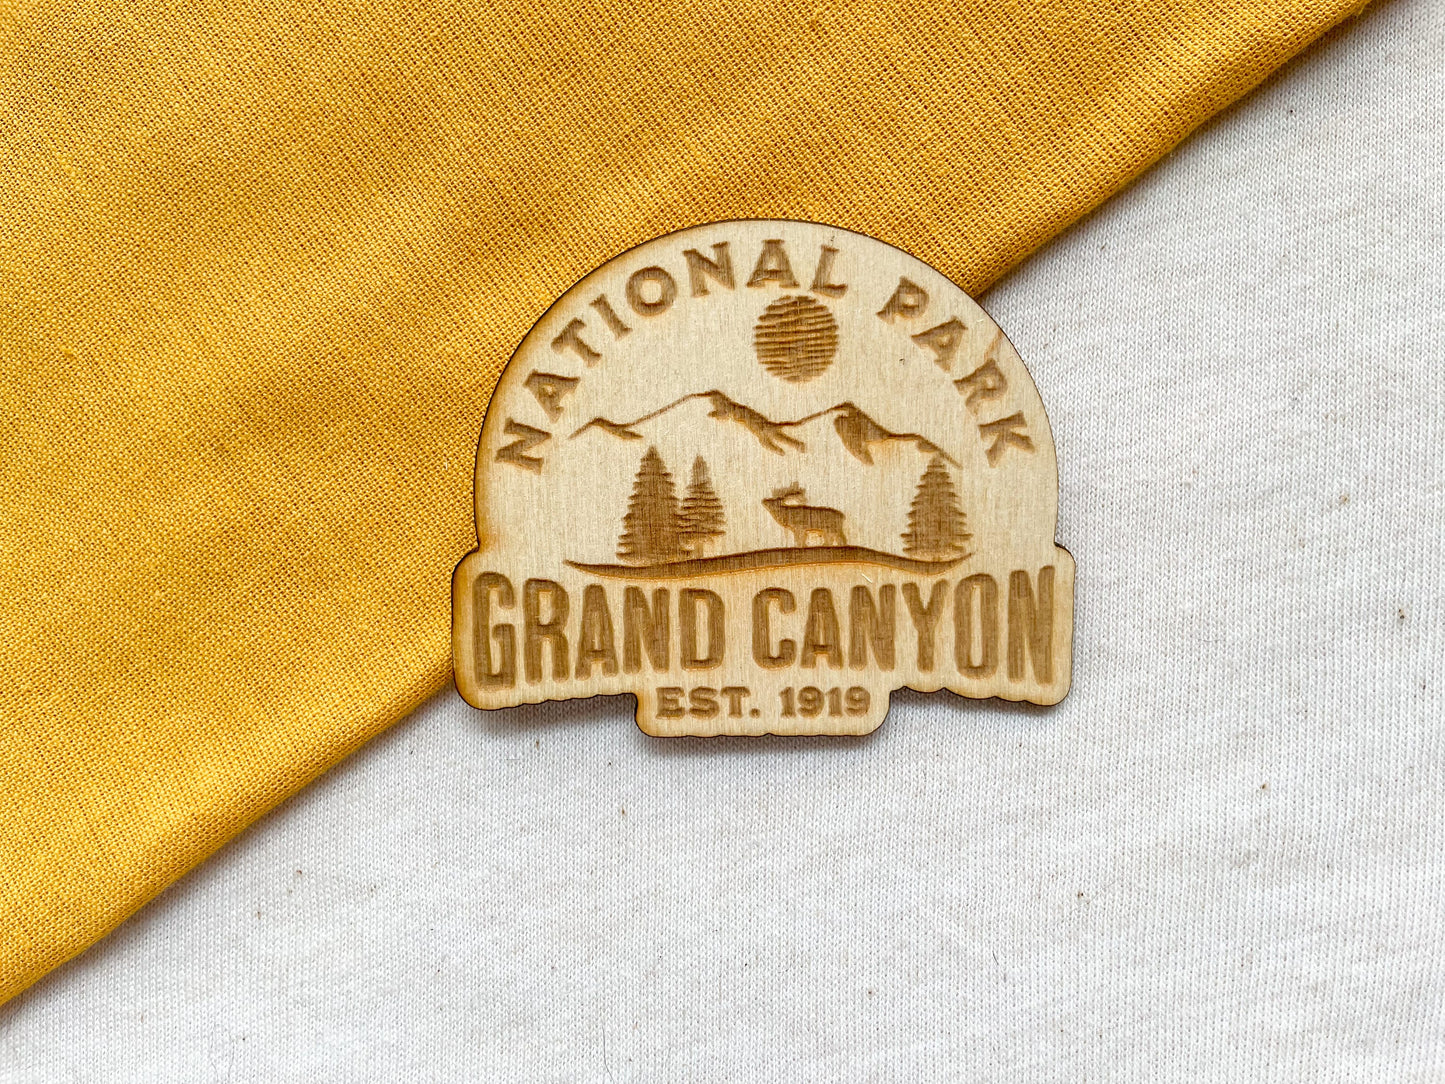 Grand Canyon National Park Magnet